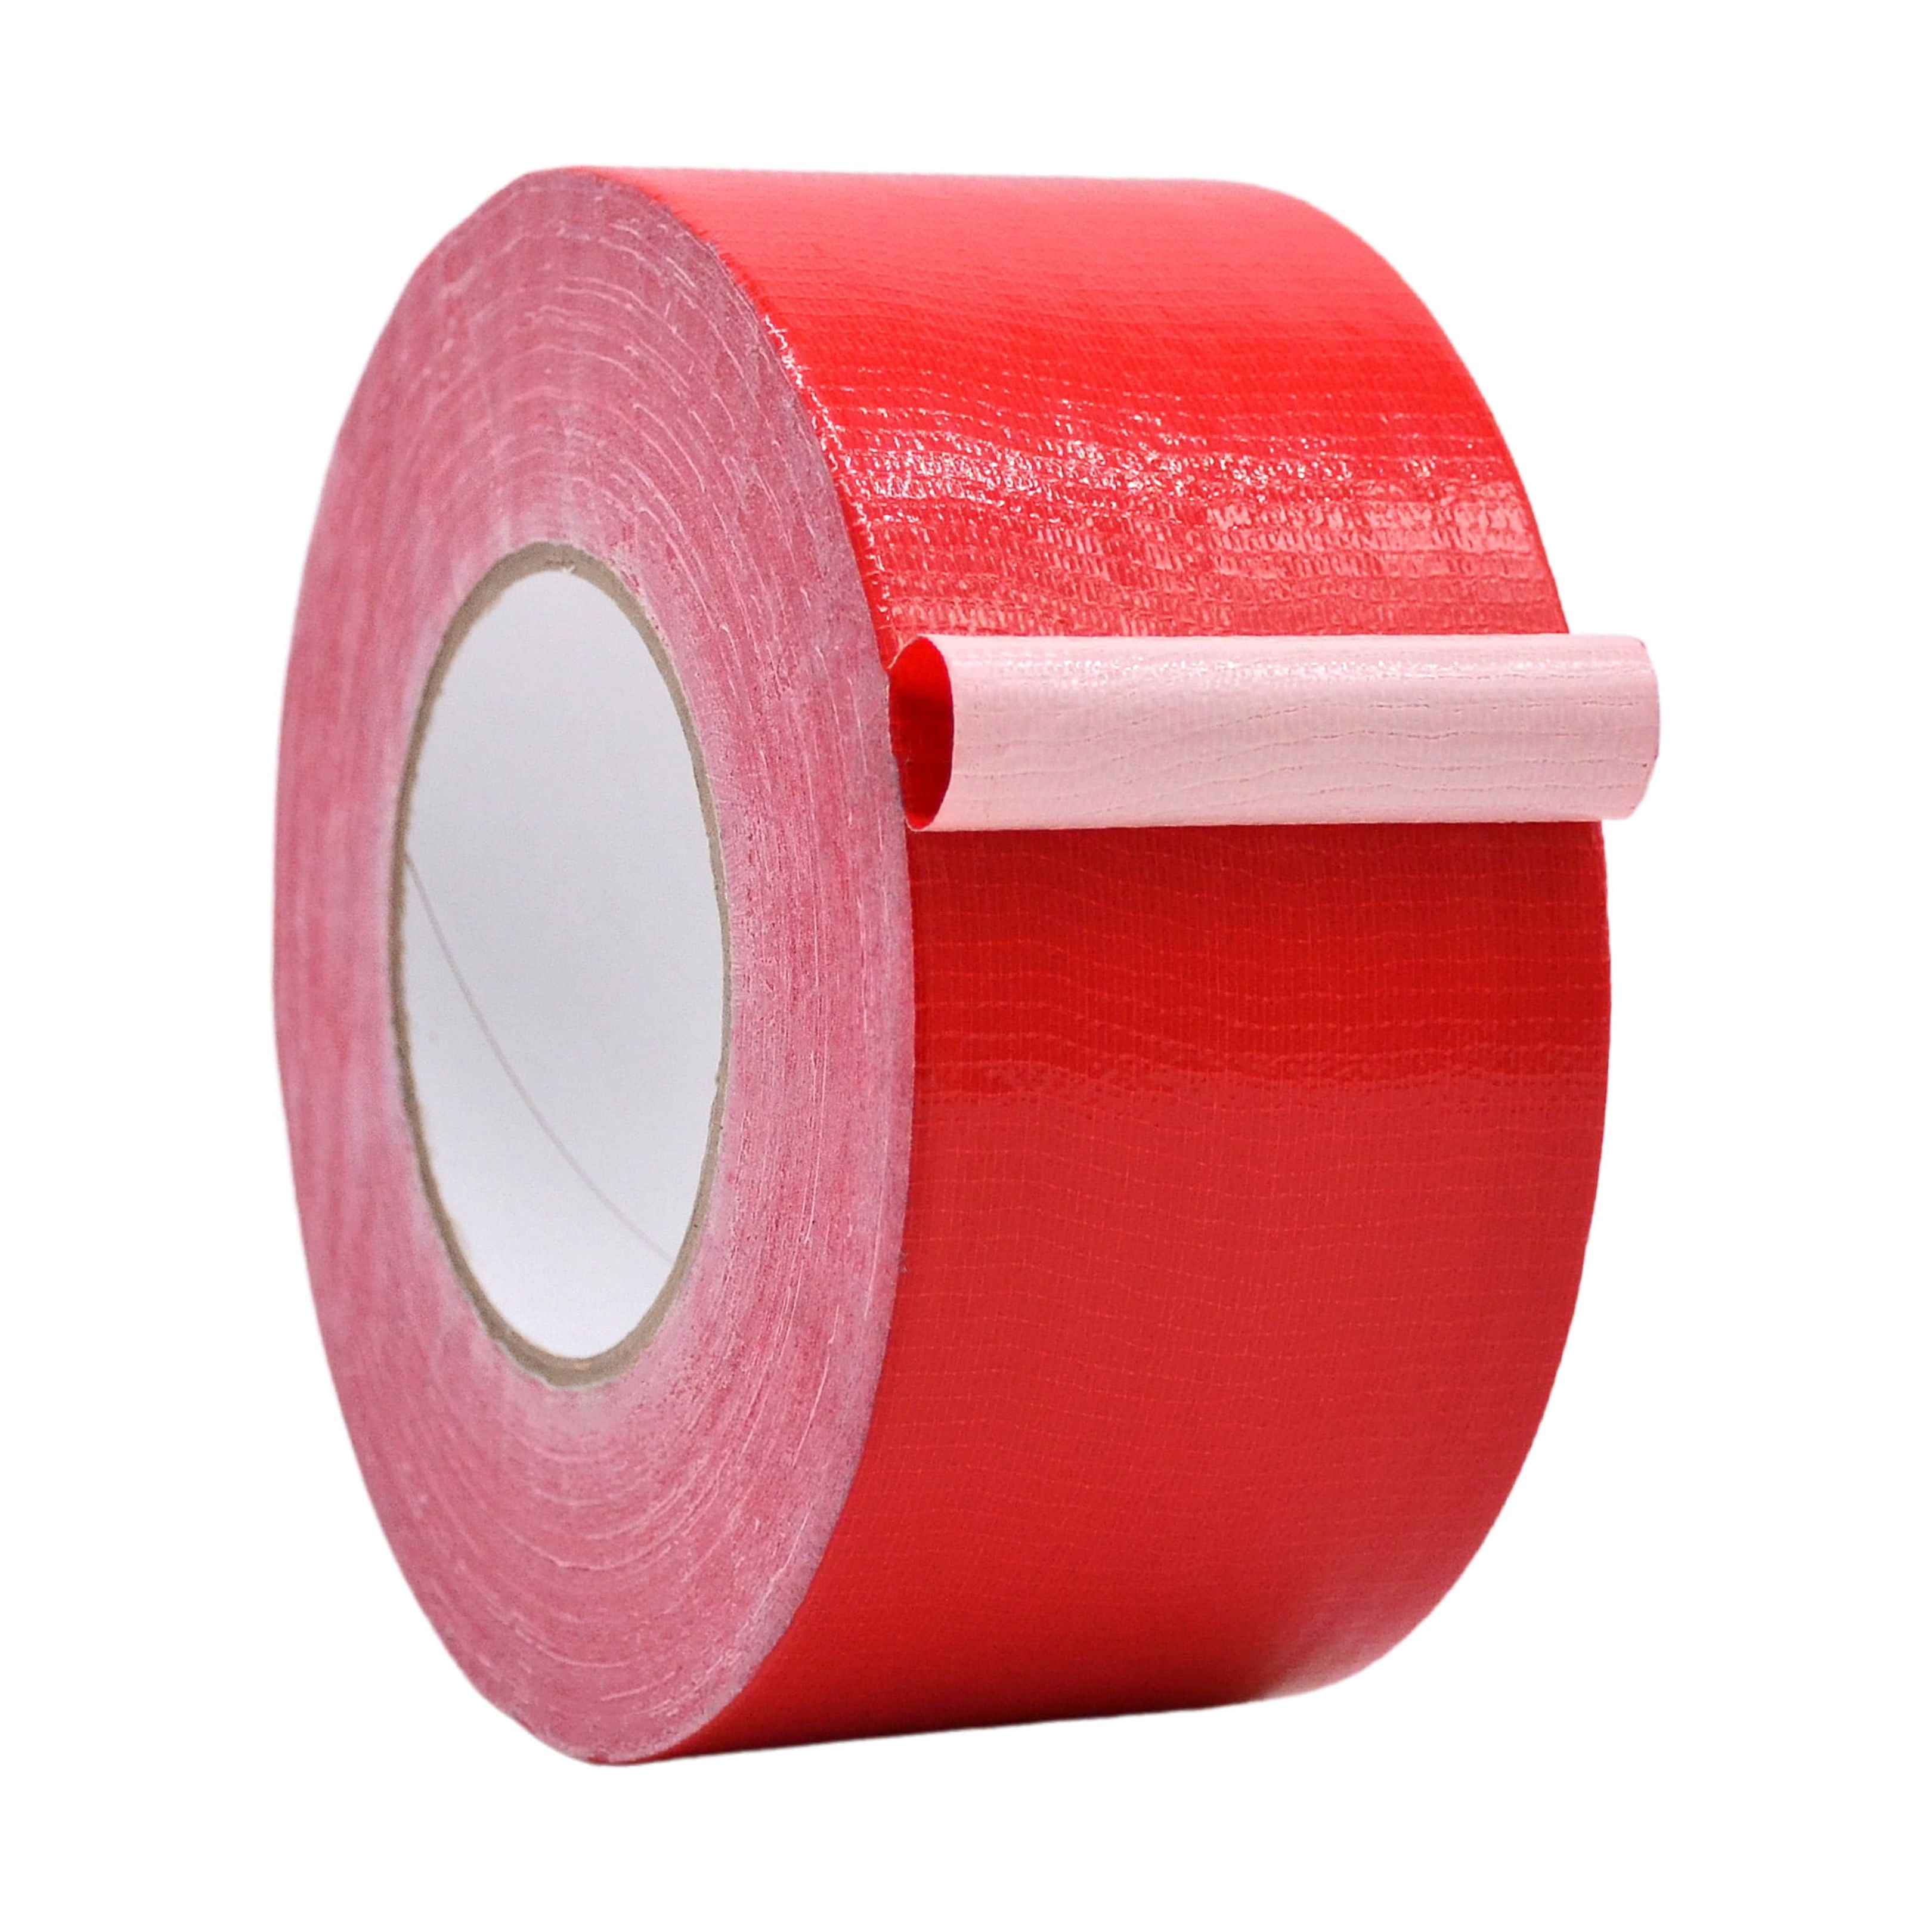 Wod Tape White Duct Tape - 6 in x 60 yds - Strong Waterproof Dtc10